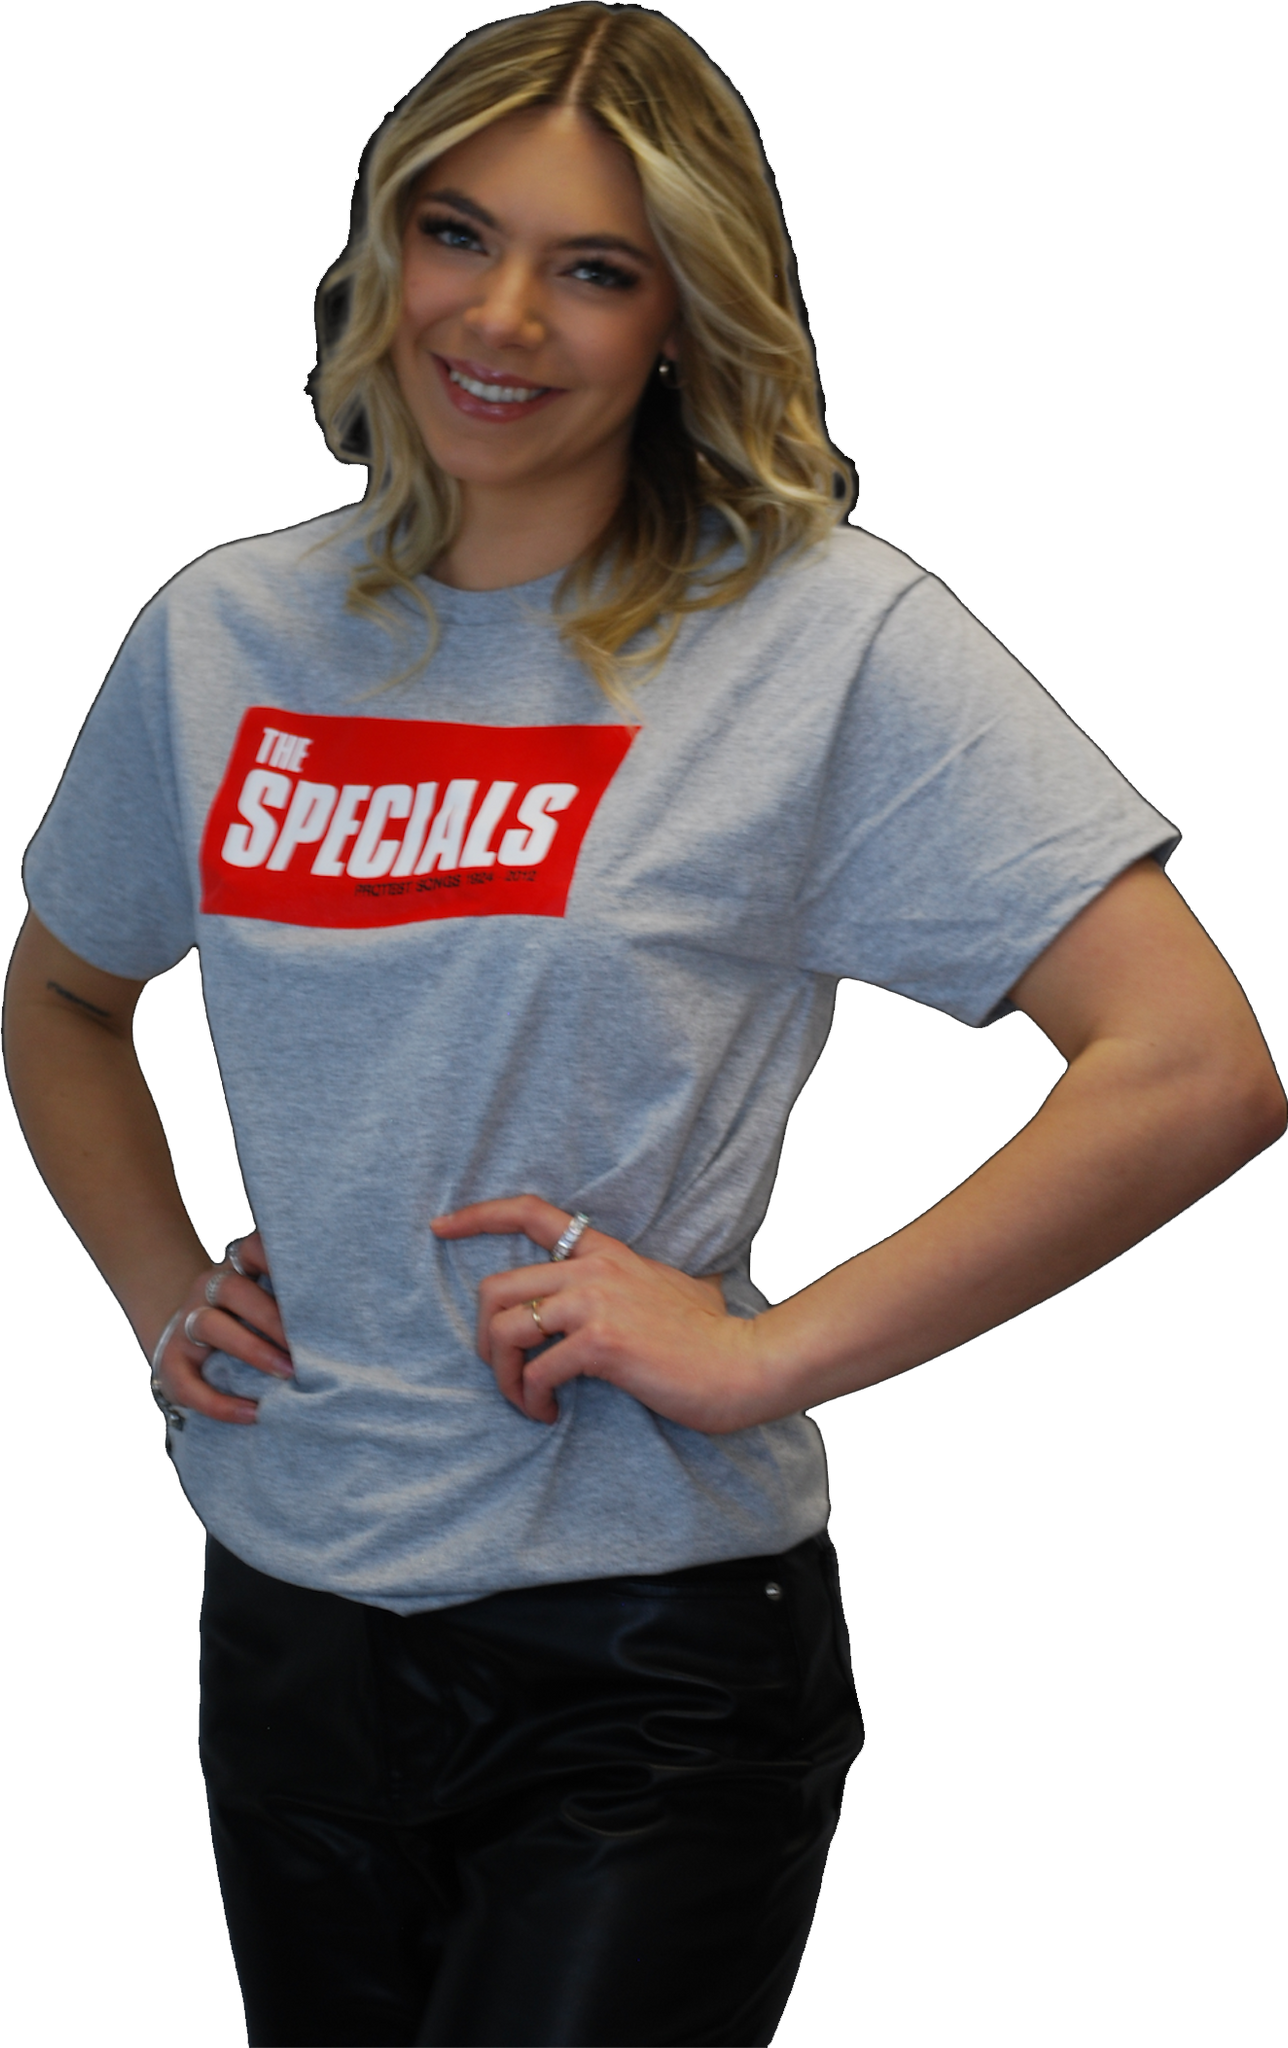 THE SPECIALS - "PROTEST SONGS" T-SHIRT